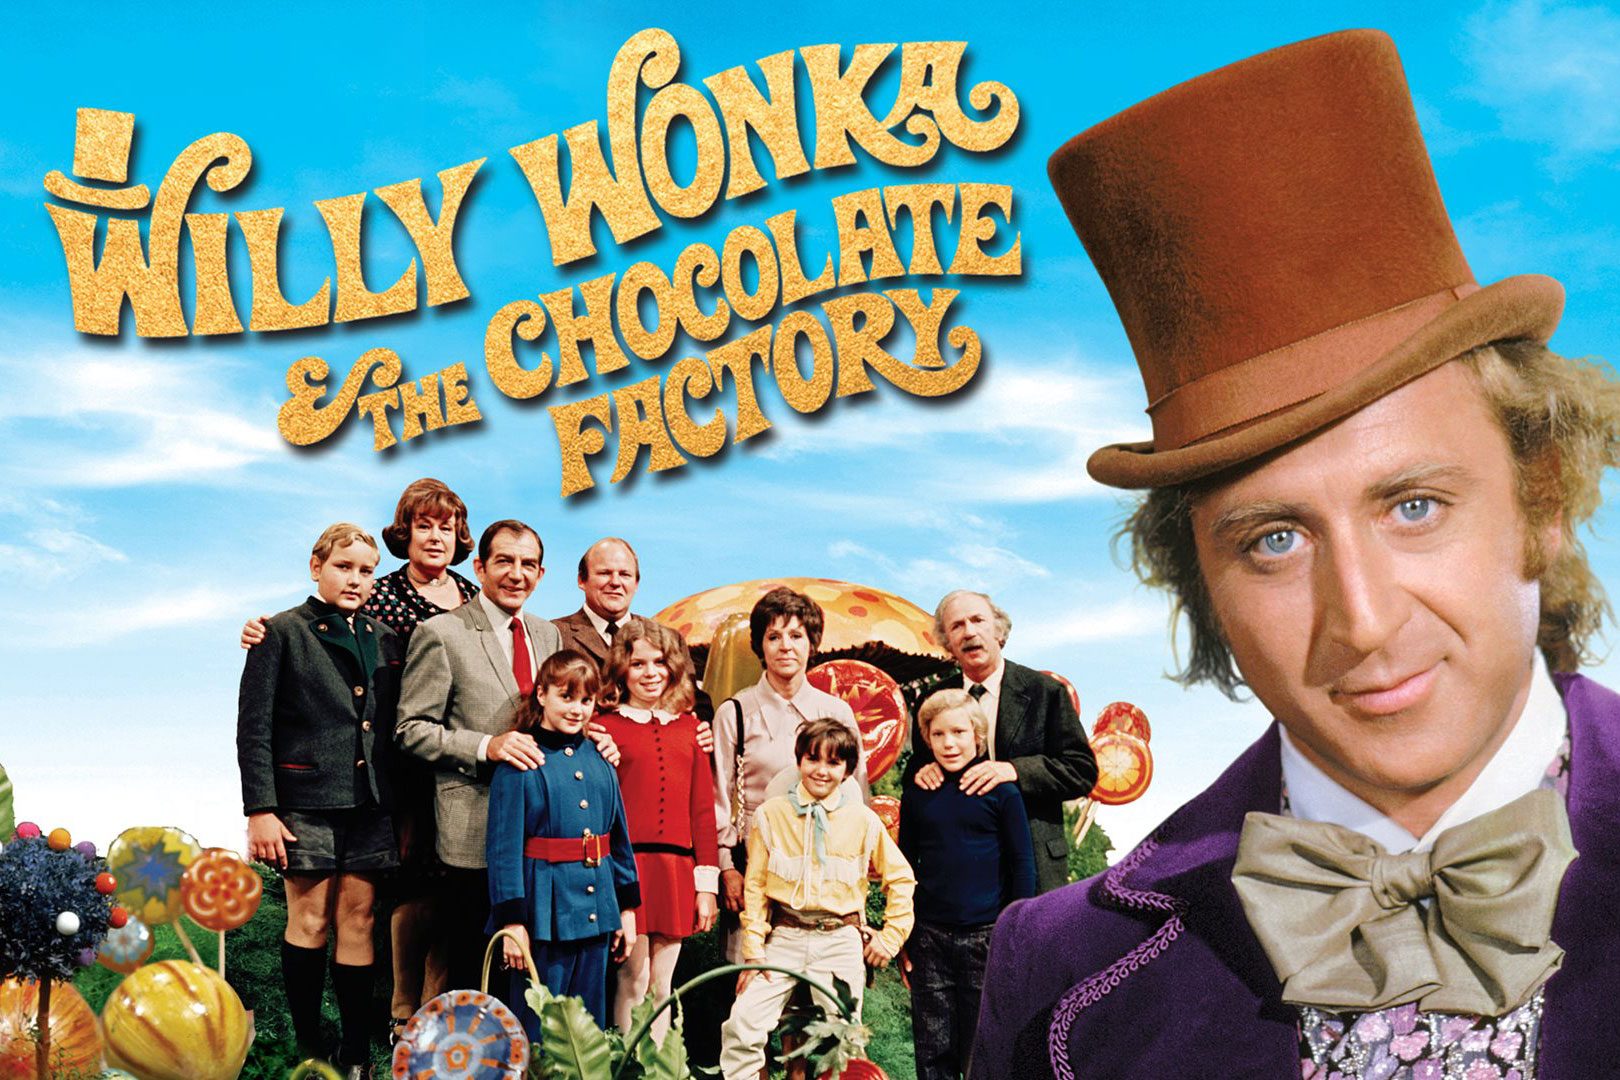 Rd Willy Wonka And The Chocolate Factory Via Amazon.com